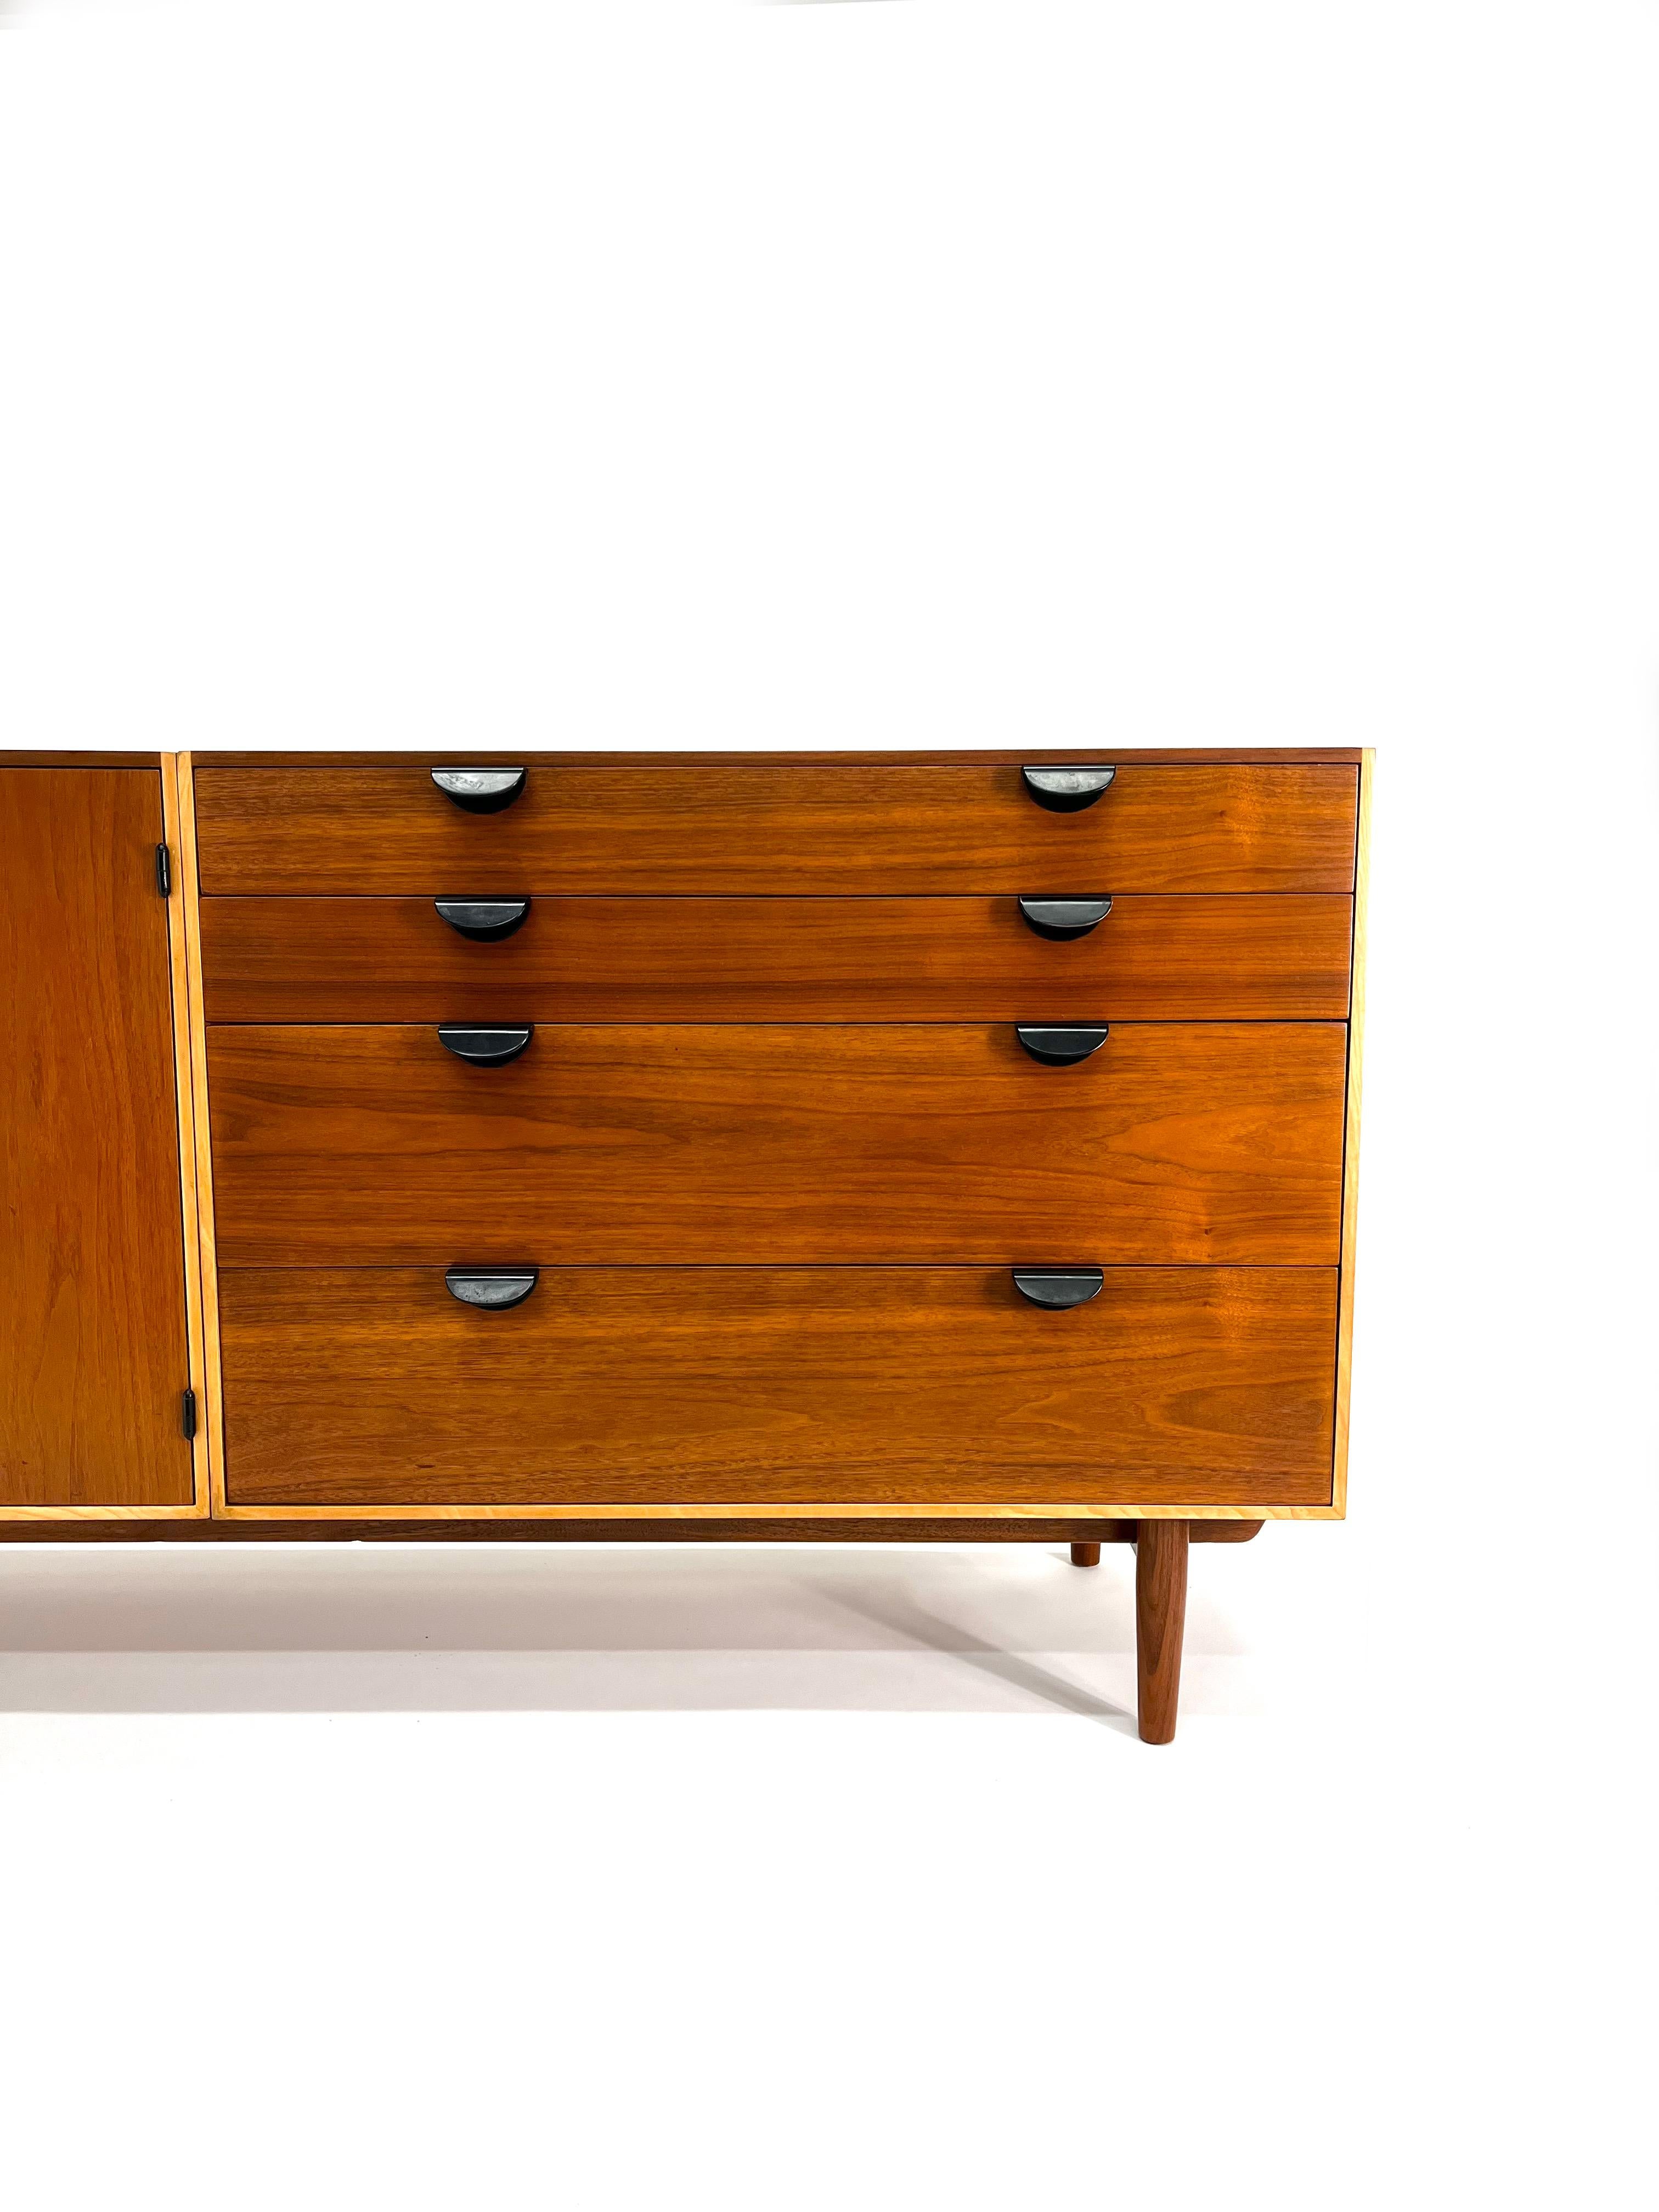 Finn Juhl Credenza For Baker In Good Condition For Sale In San Diego, CA